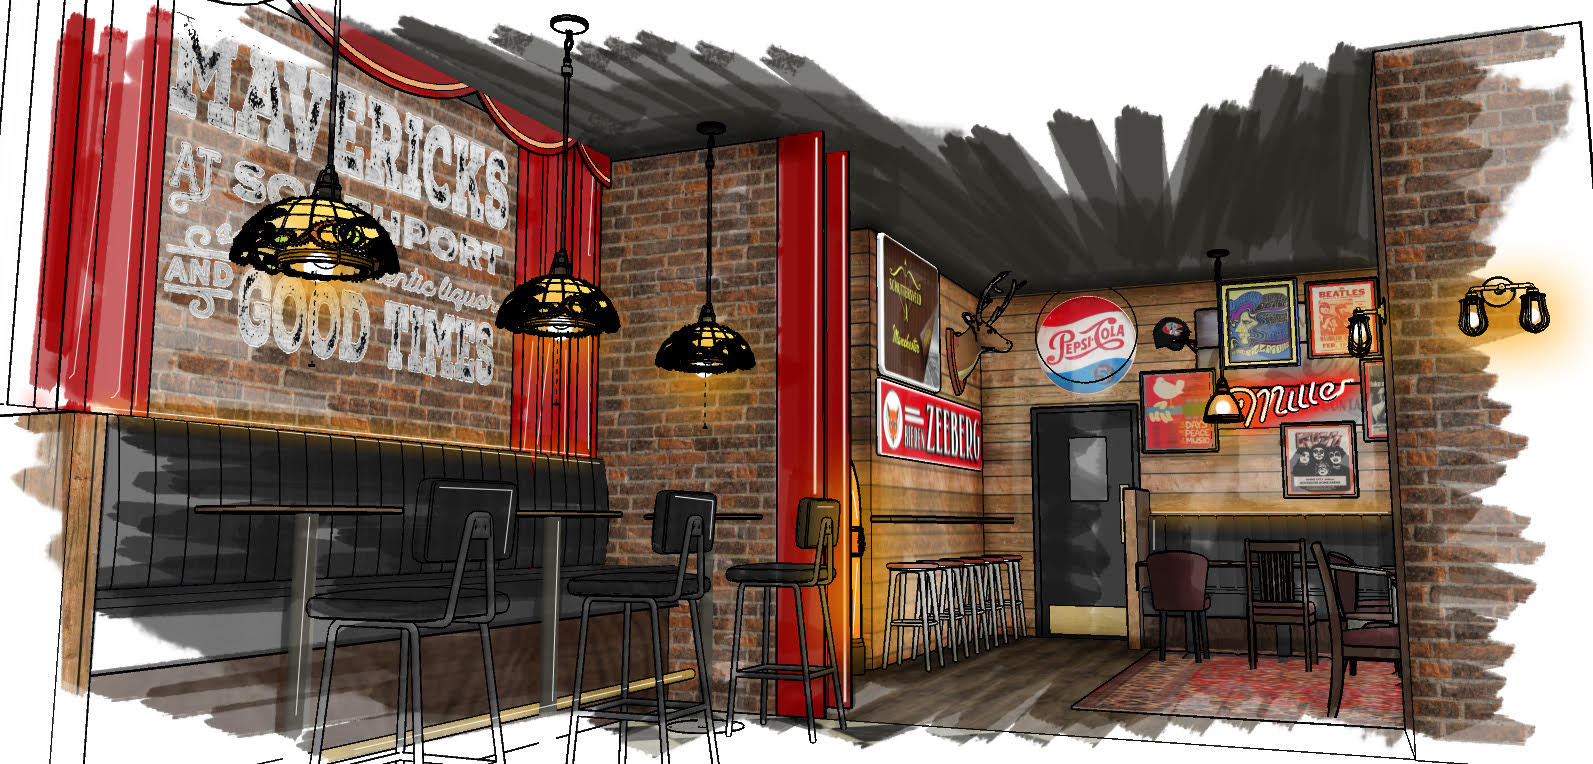 An artist's impression of the new Maverick's American Themed Dive Bar which is being opened on the corner of Lord Street and Nevill Street in Southport by Mikhail Hotel and Leisure Group